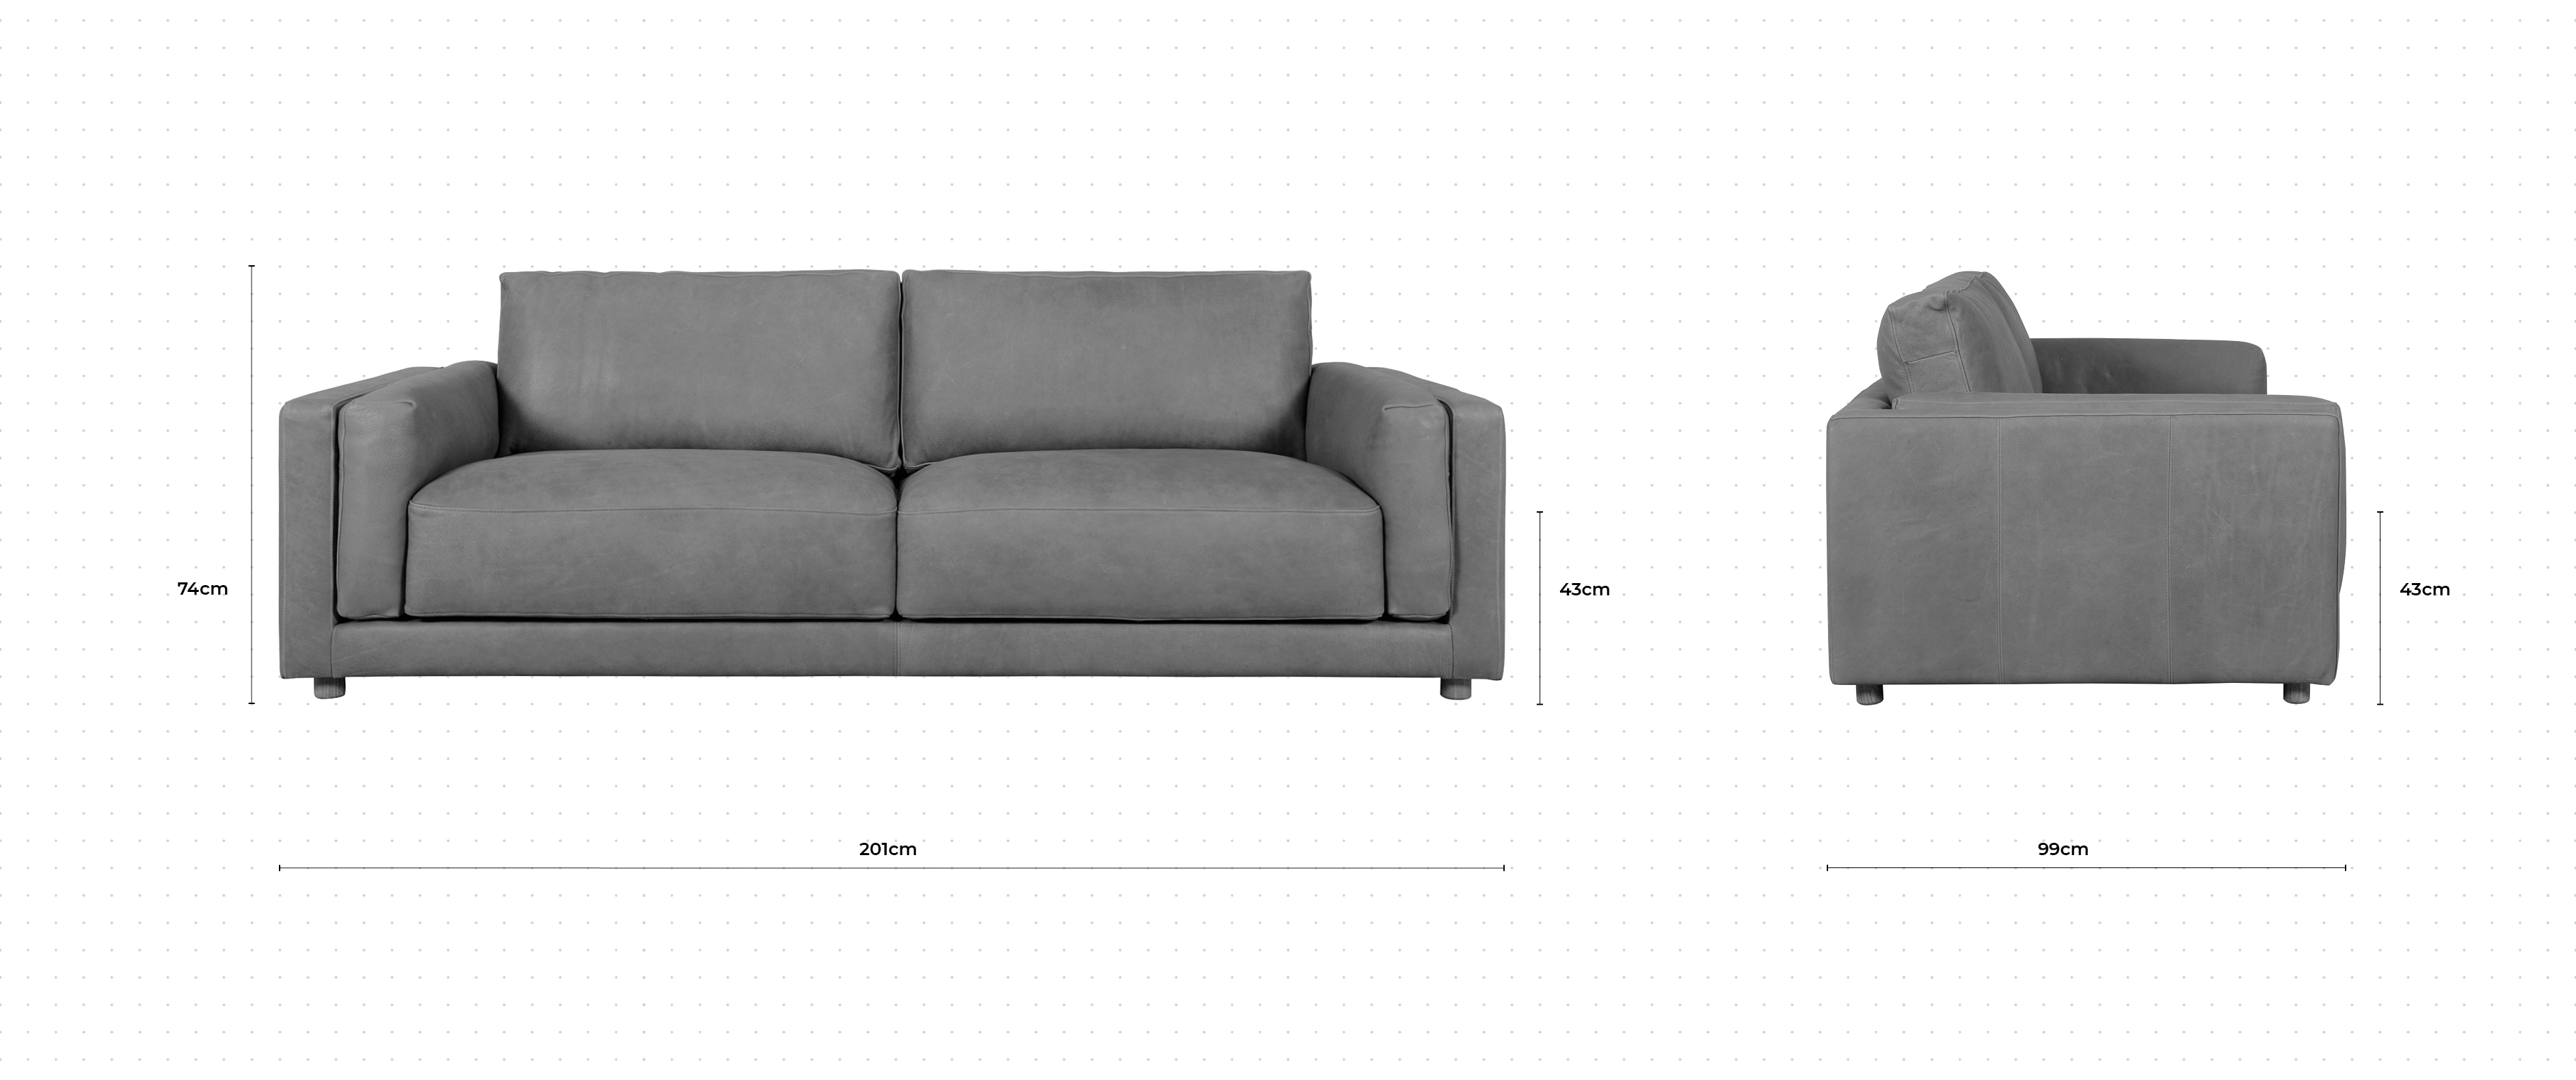 Butter 2 Seater Sofa dimensions